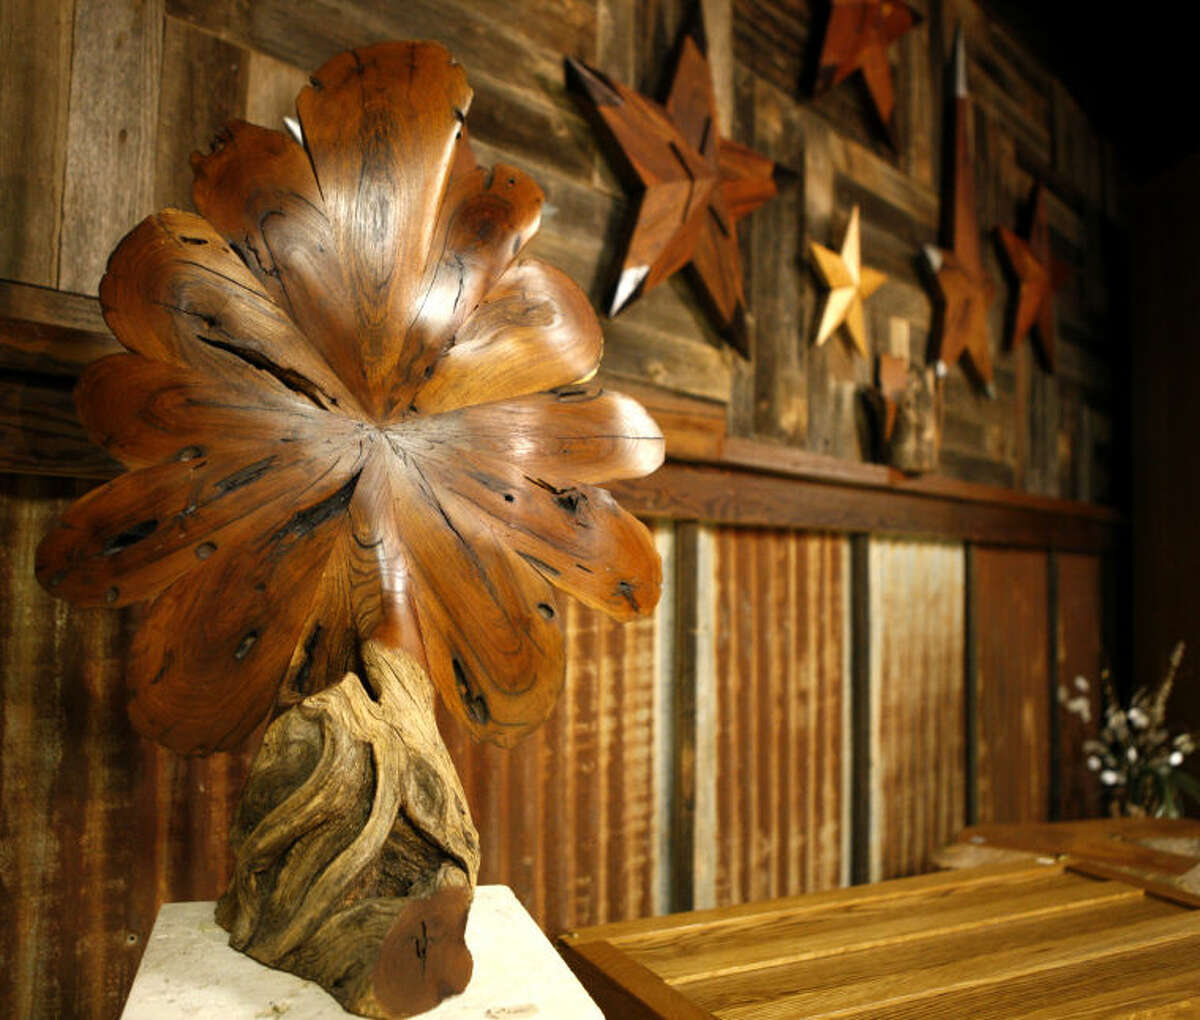 Handcrafted wood art by local artist Steve Culver hang on display during an event featuring art by the artist as well as a Manuscript wine tasting on Saturday. James Durbin/Reporter-Telegram